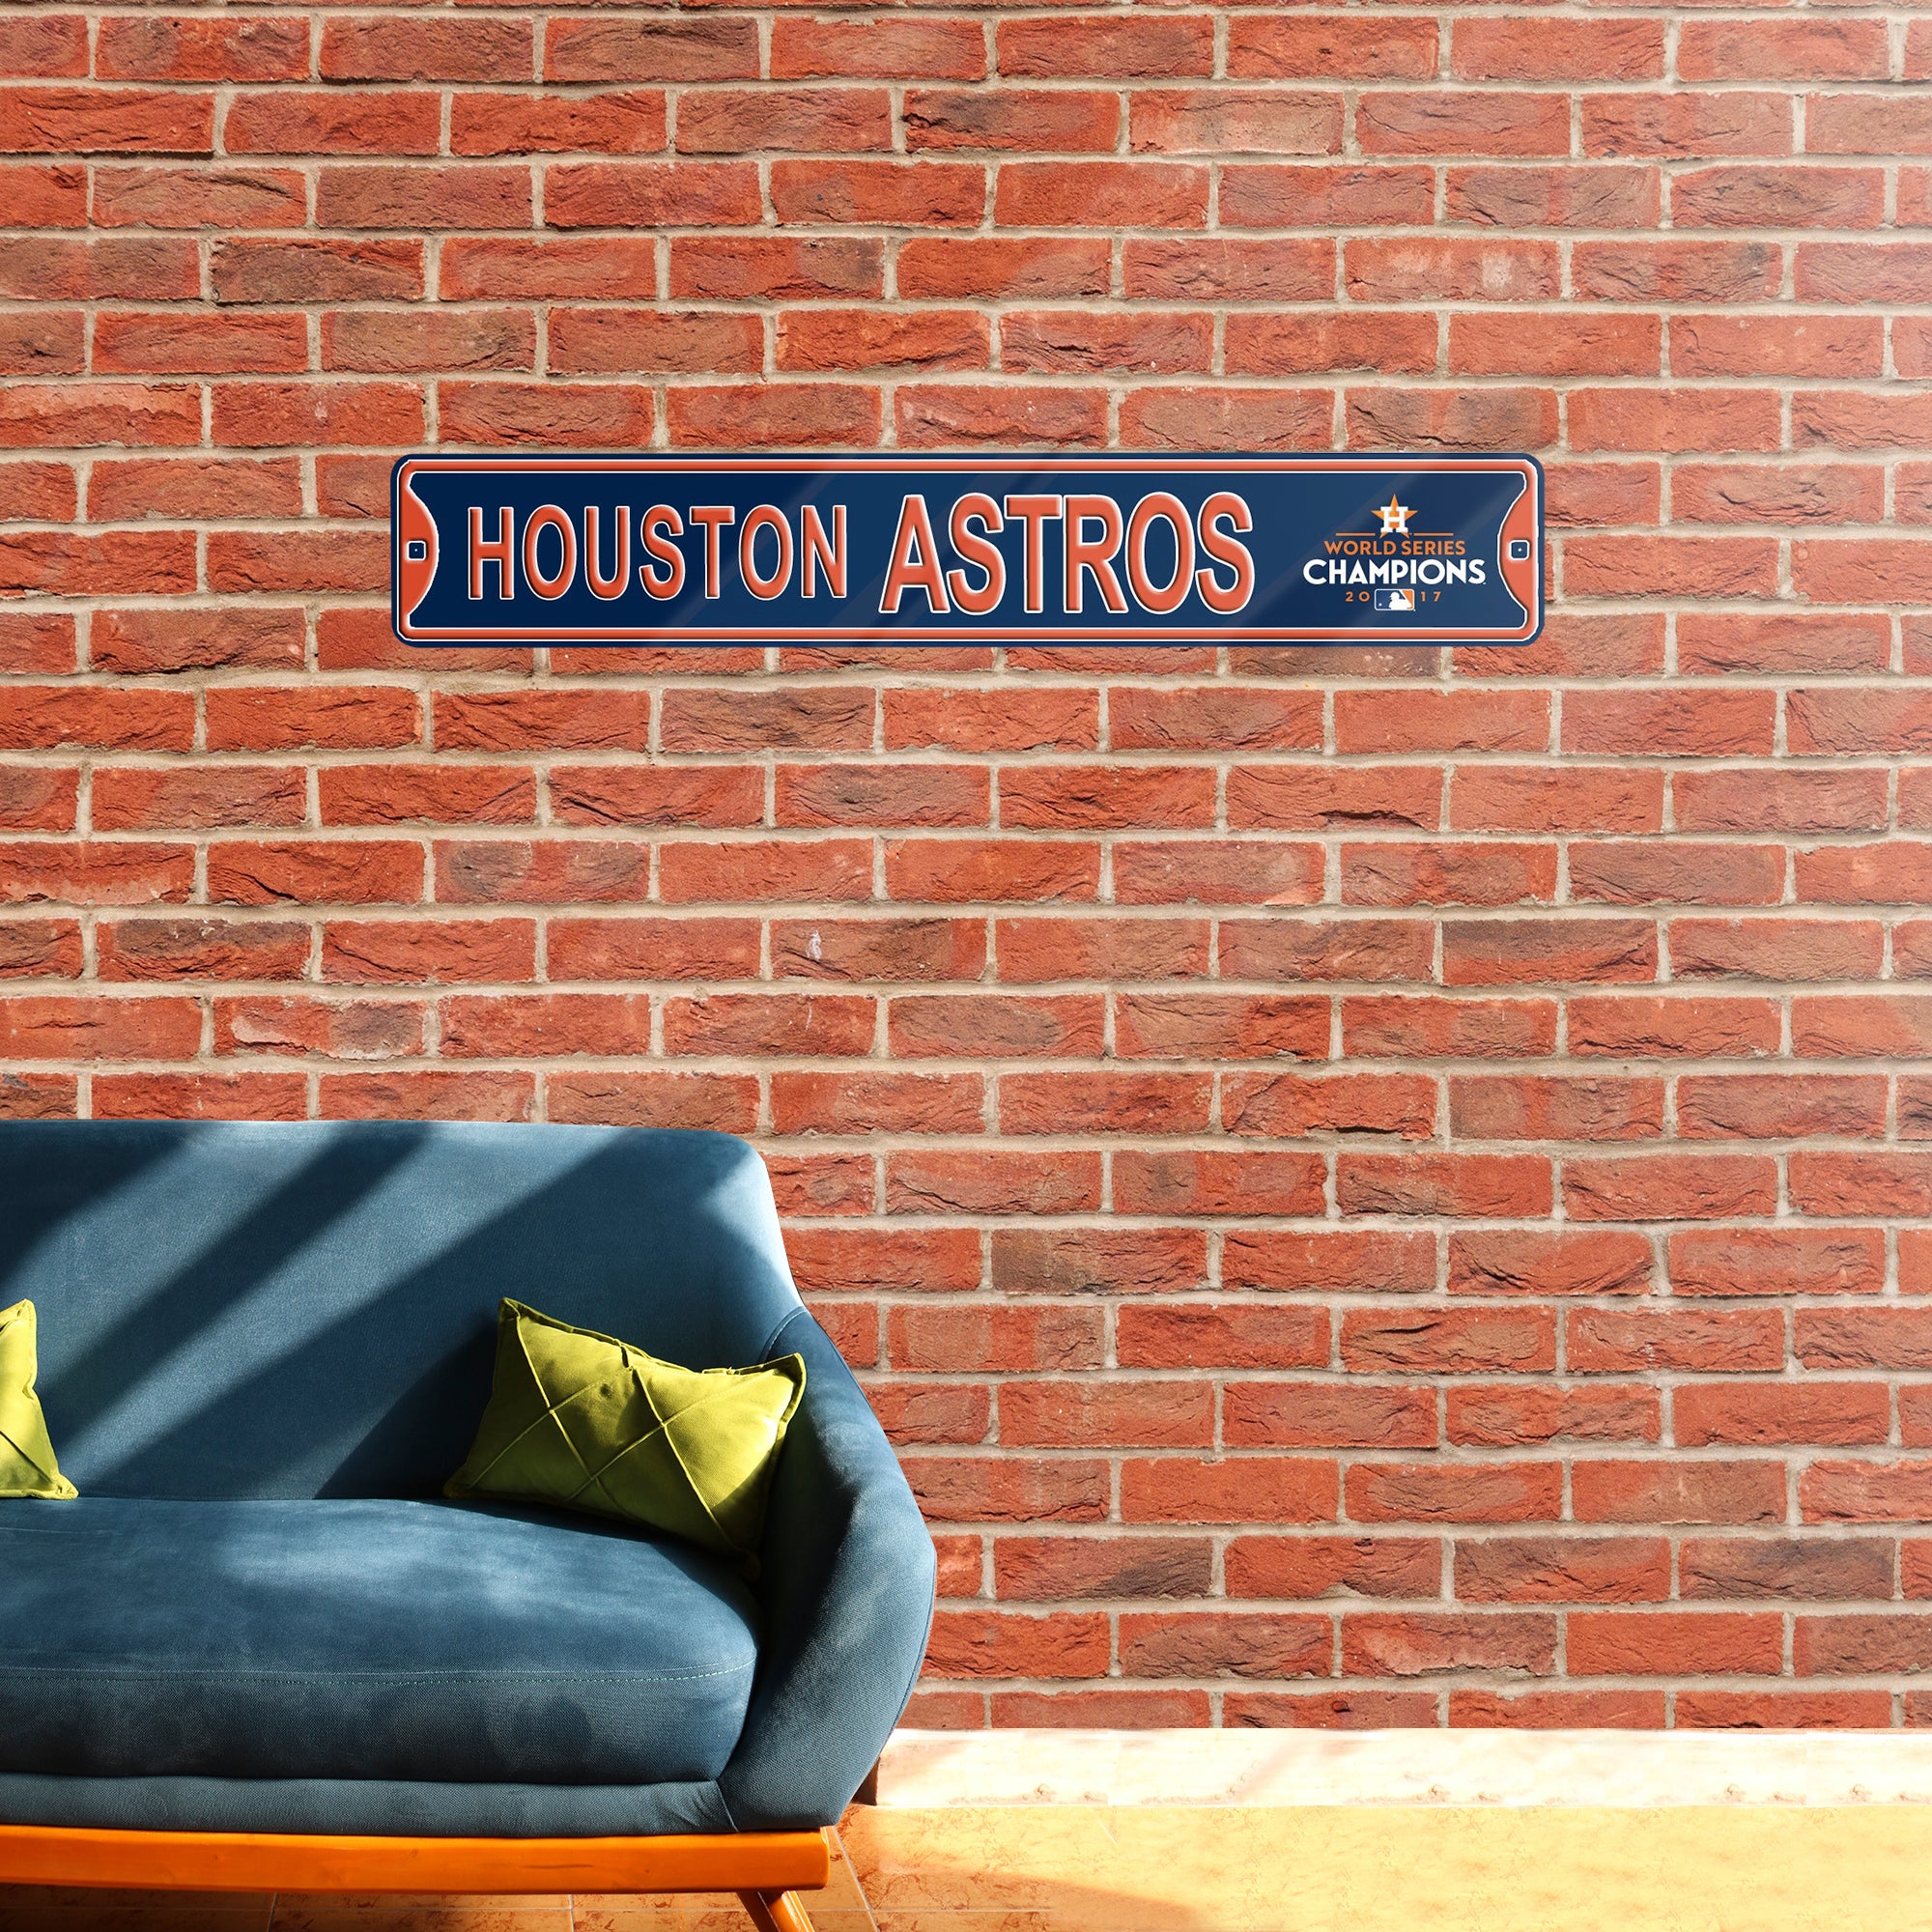 Houston Astros Steel Street Sign with Logo-WS 2017 Champions 36" W x 6" H by Fathead